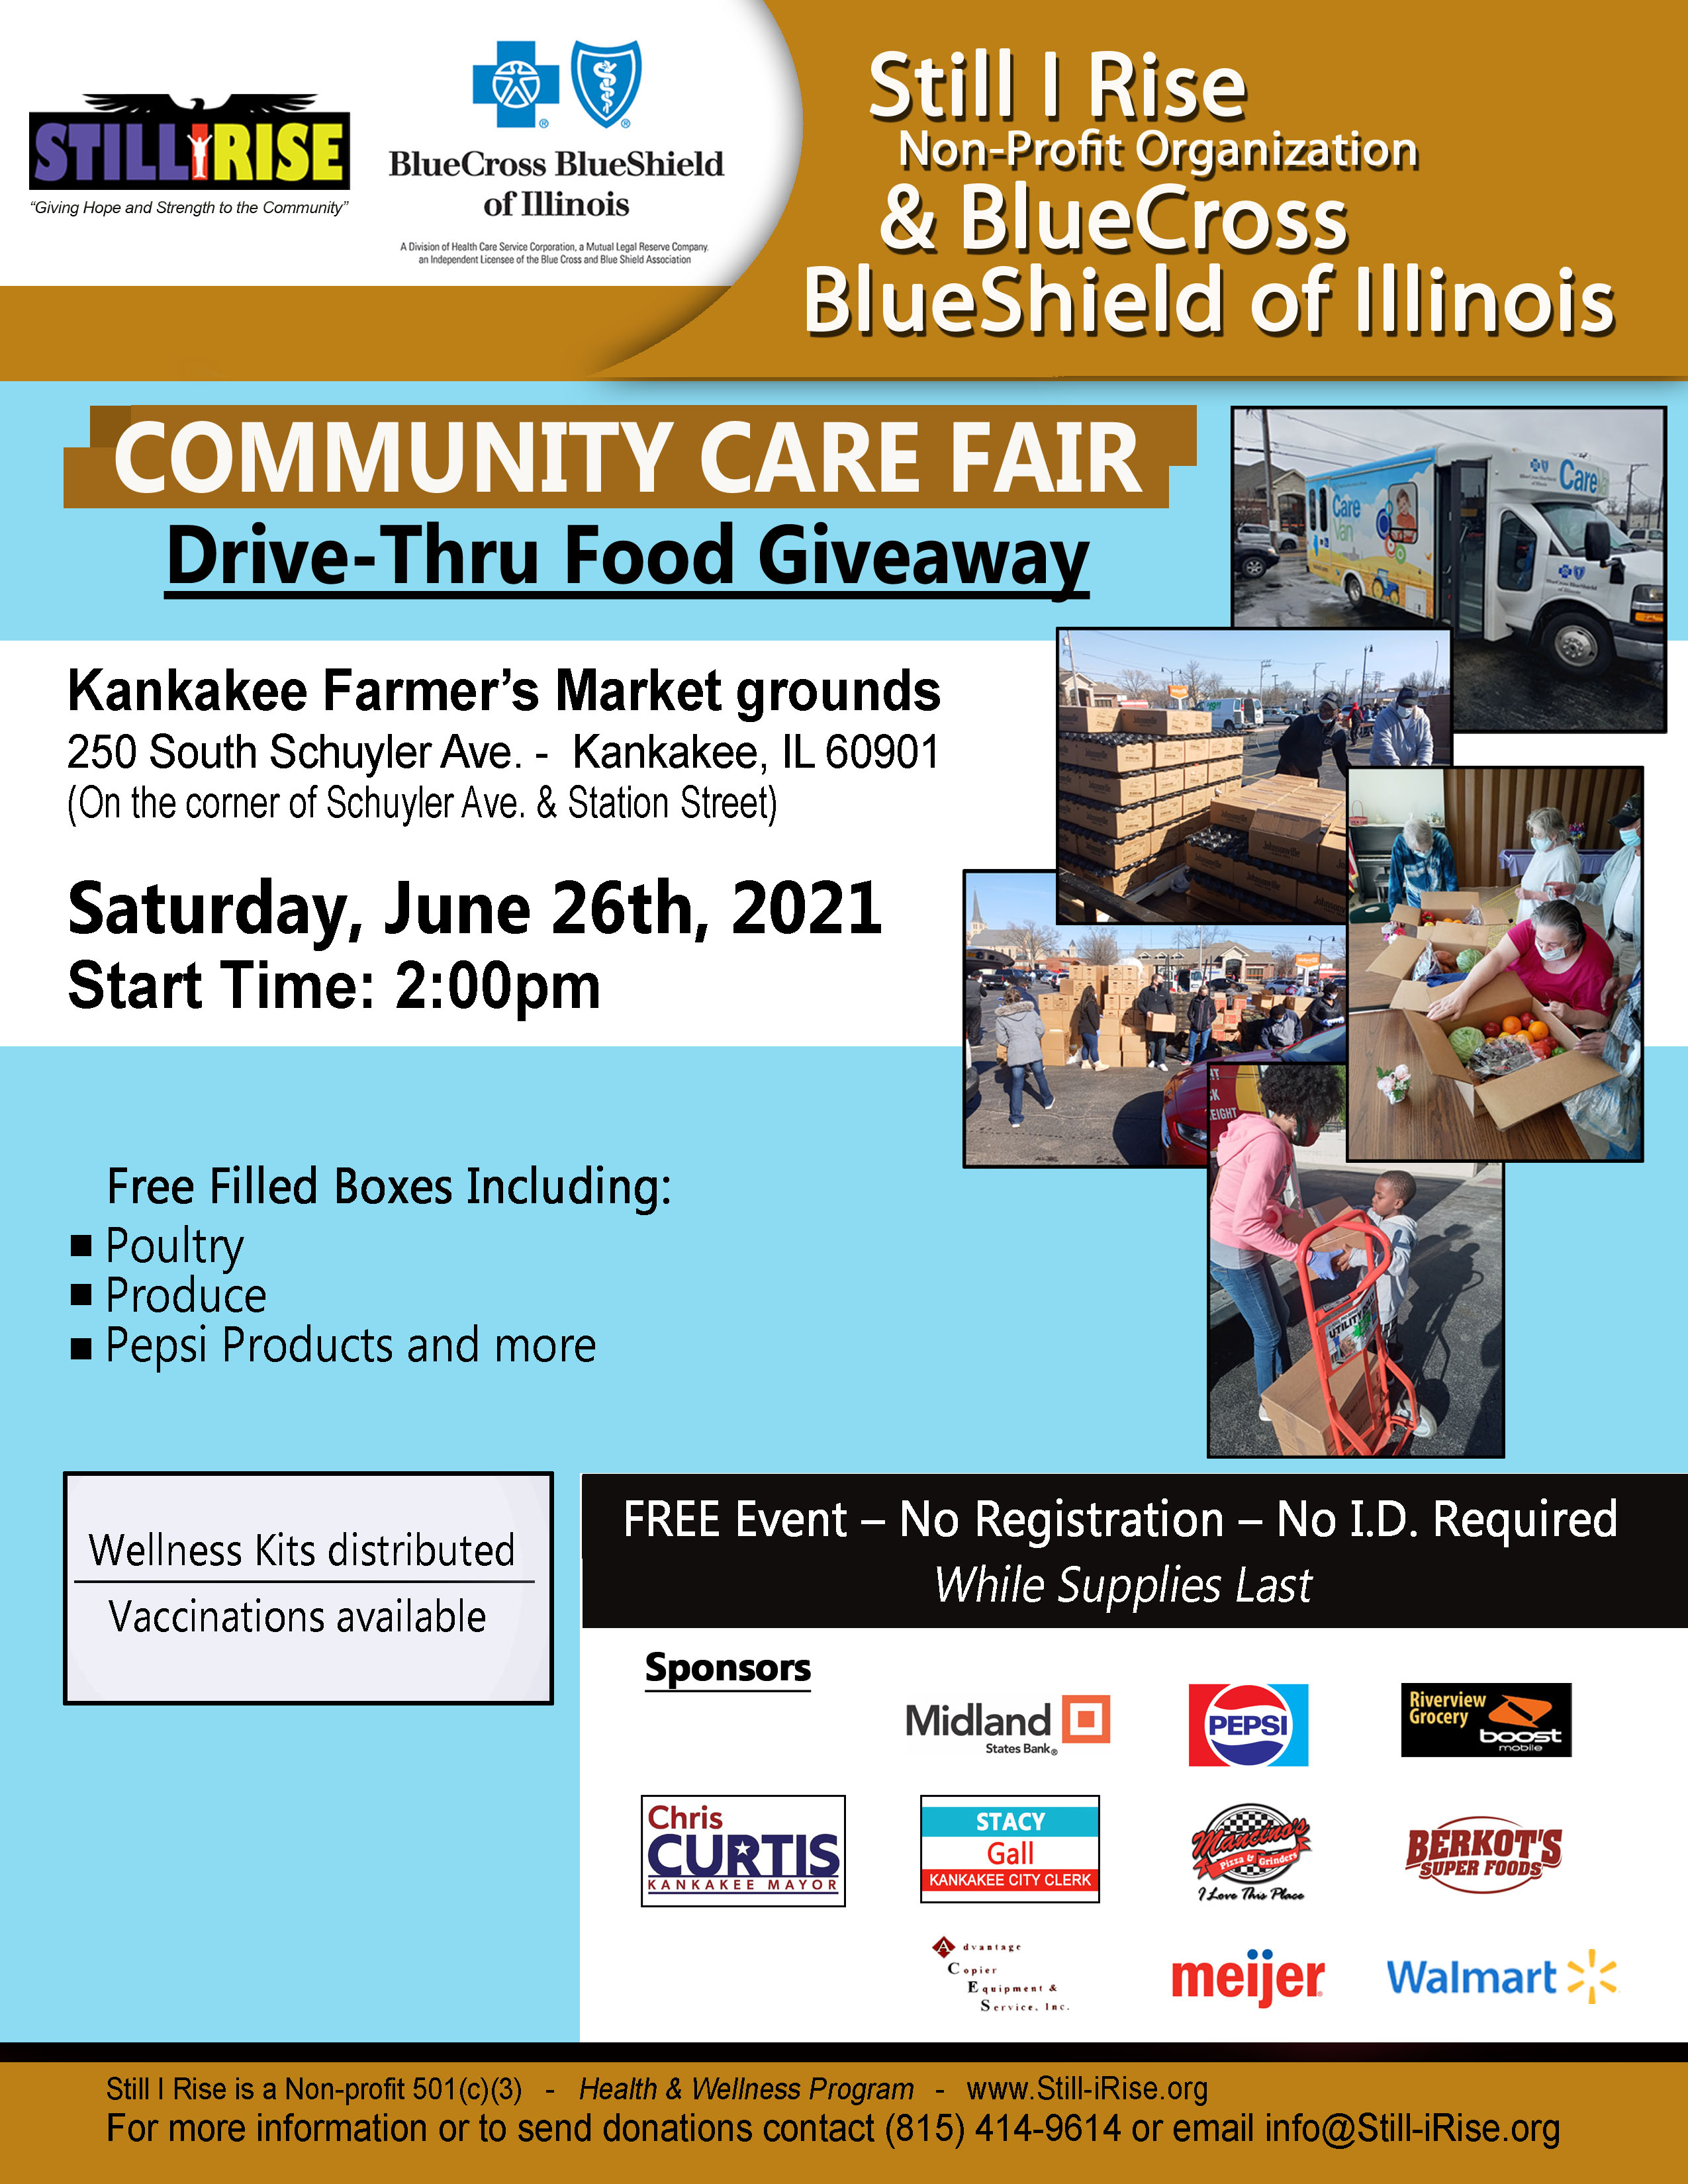 Still I Rise: Community Care Fair and Drive-Thru Food Giveaway